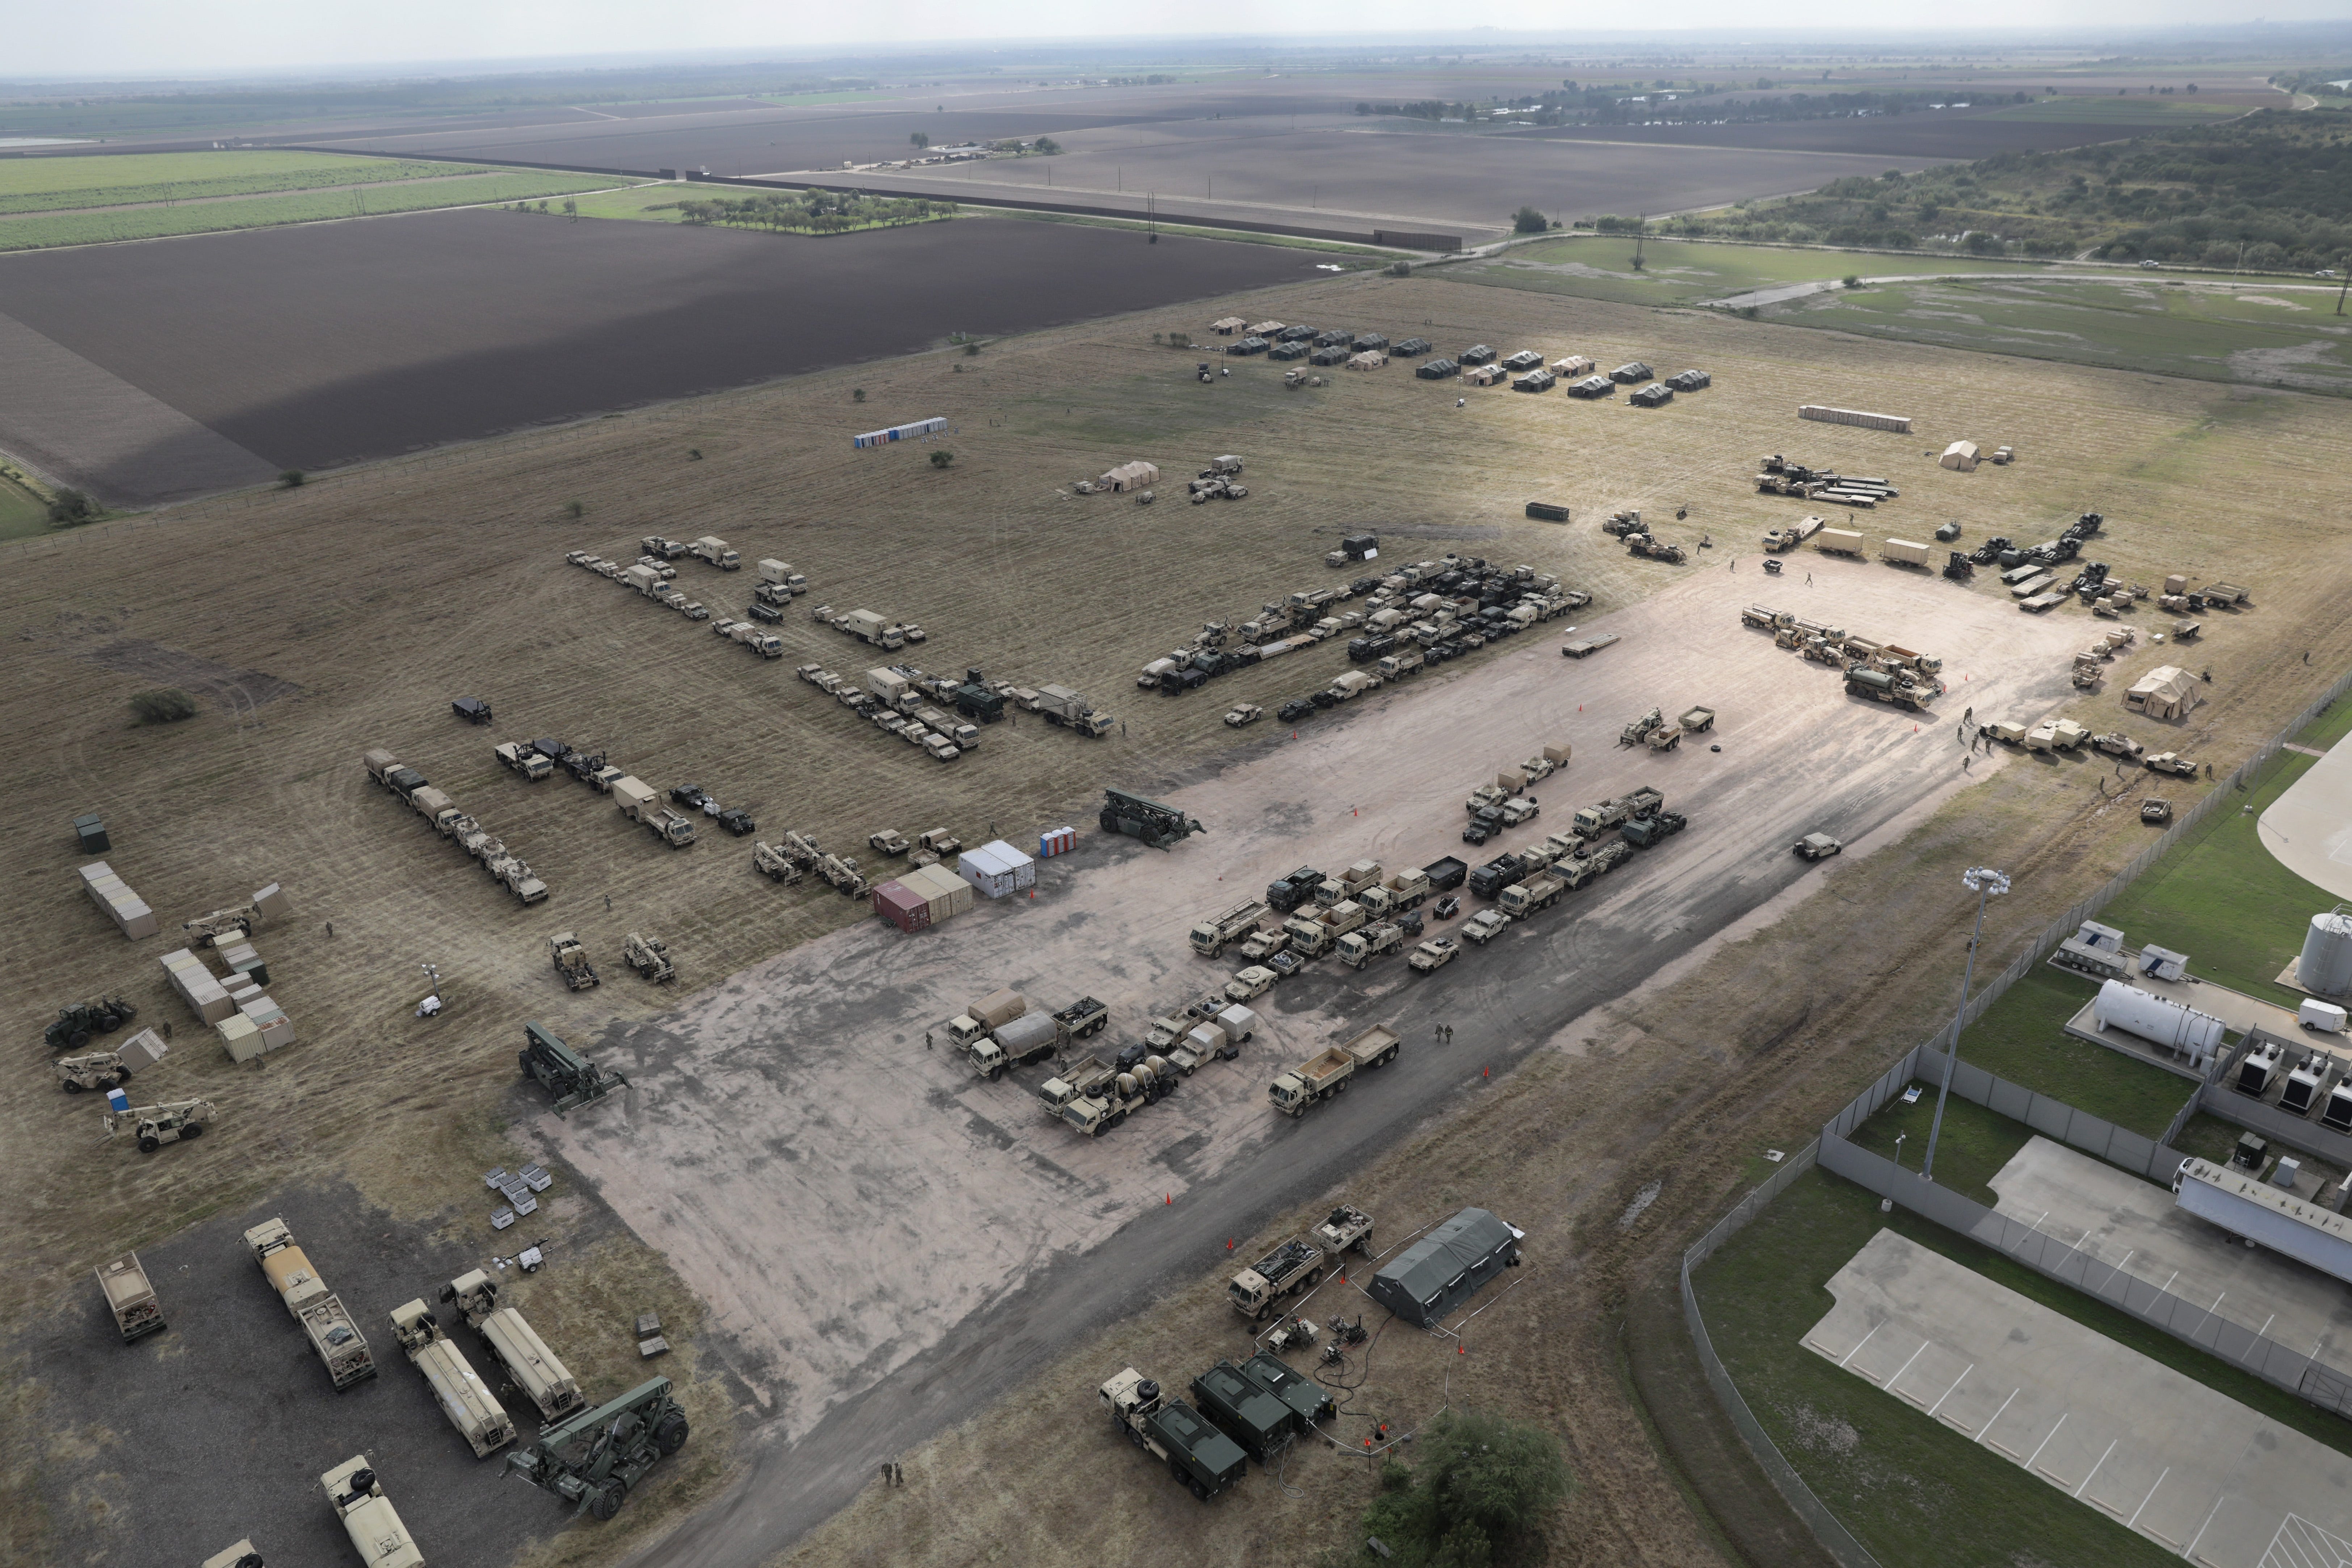 U.S. Army vehicles sit at a military camp under construction at the U.S.-Mexico border on November 7, 2018 in Donna, Texas. The forward operating base is located near the Donna-Rio Bravo International Bridge and port of entry between the United States and Mexico. U.S. President Donald Trump ordered troops to the border weeks in advance of the possible arrival of a migrant caravan, which the president has called an "invasion." (Photo by John Moore/Getty Images)